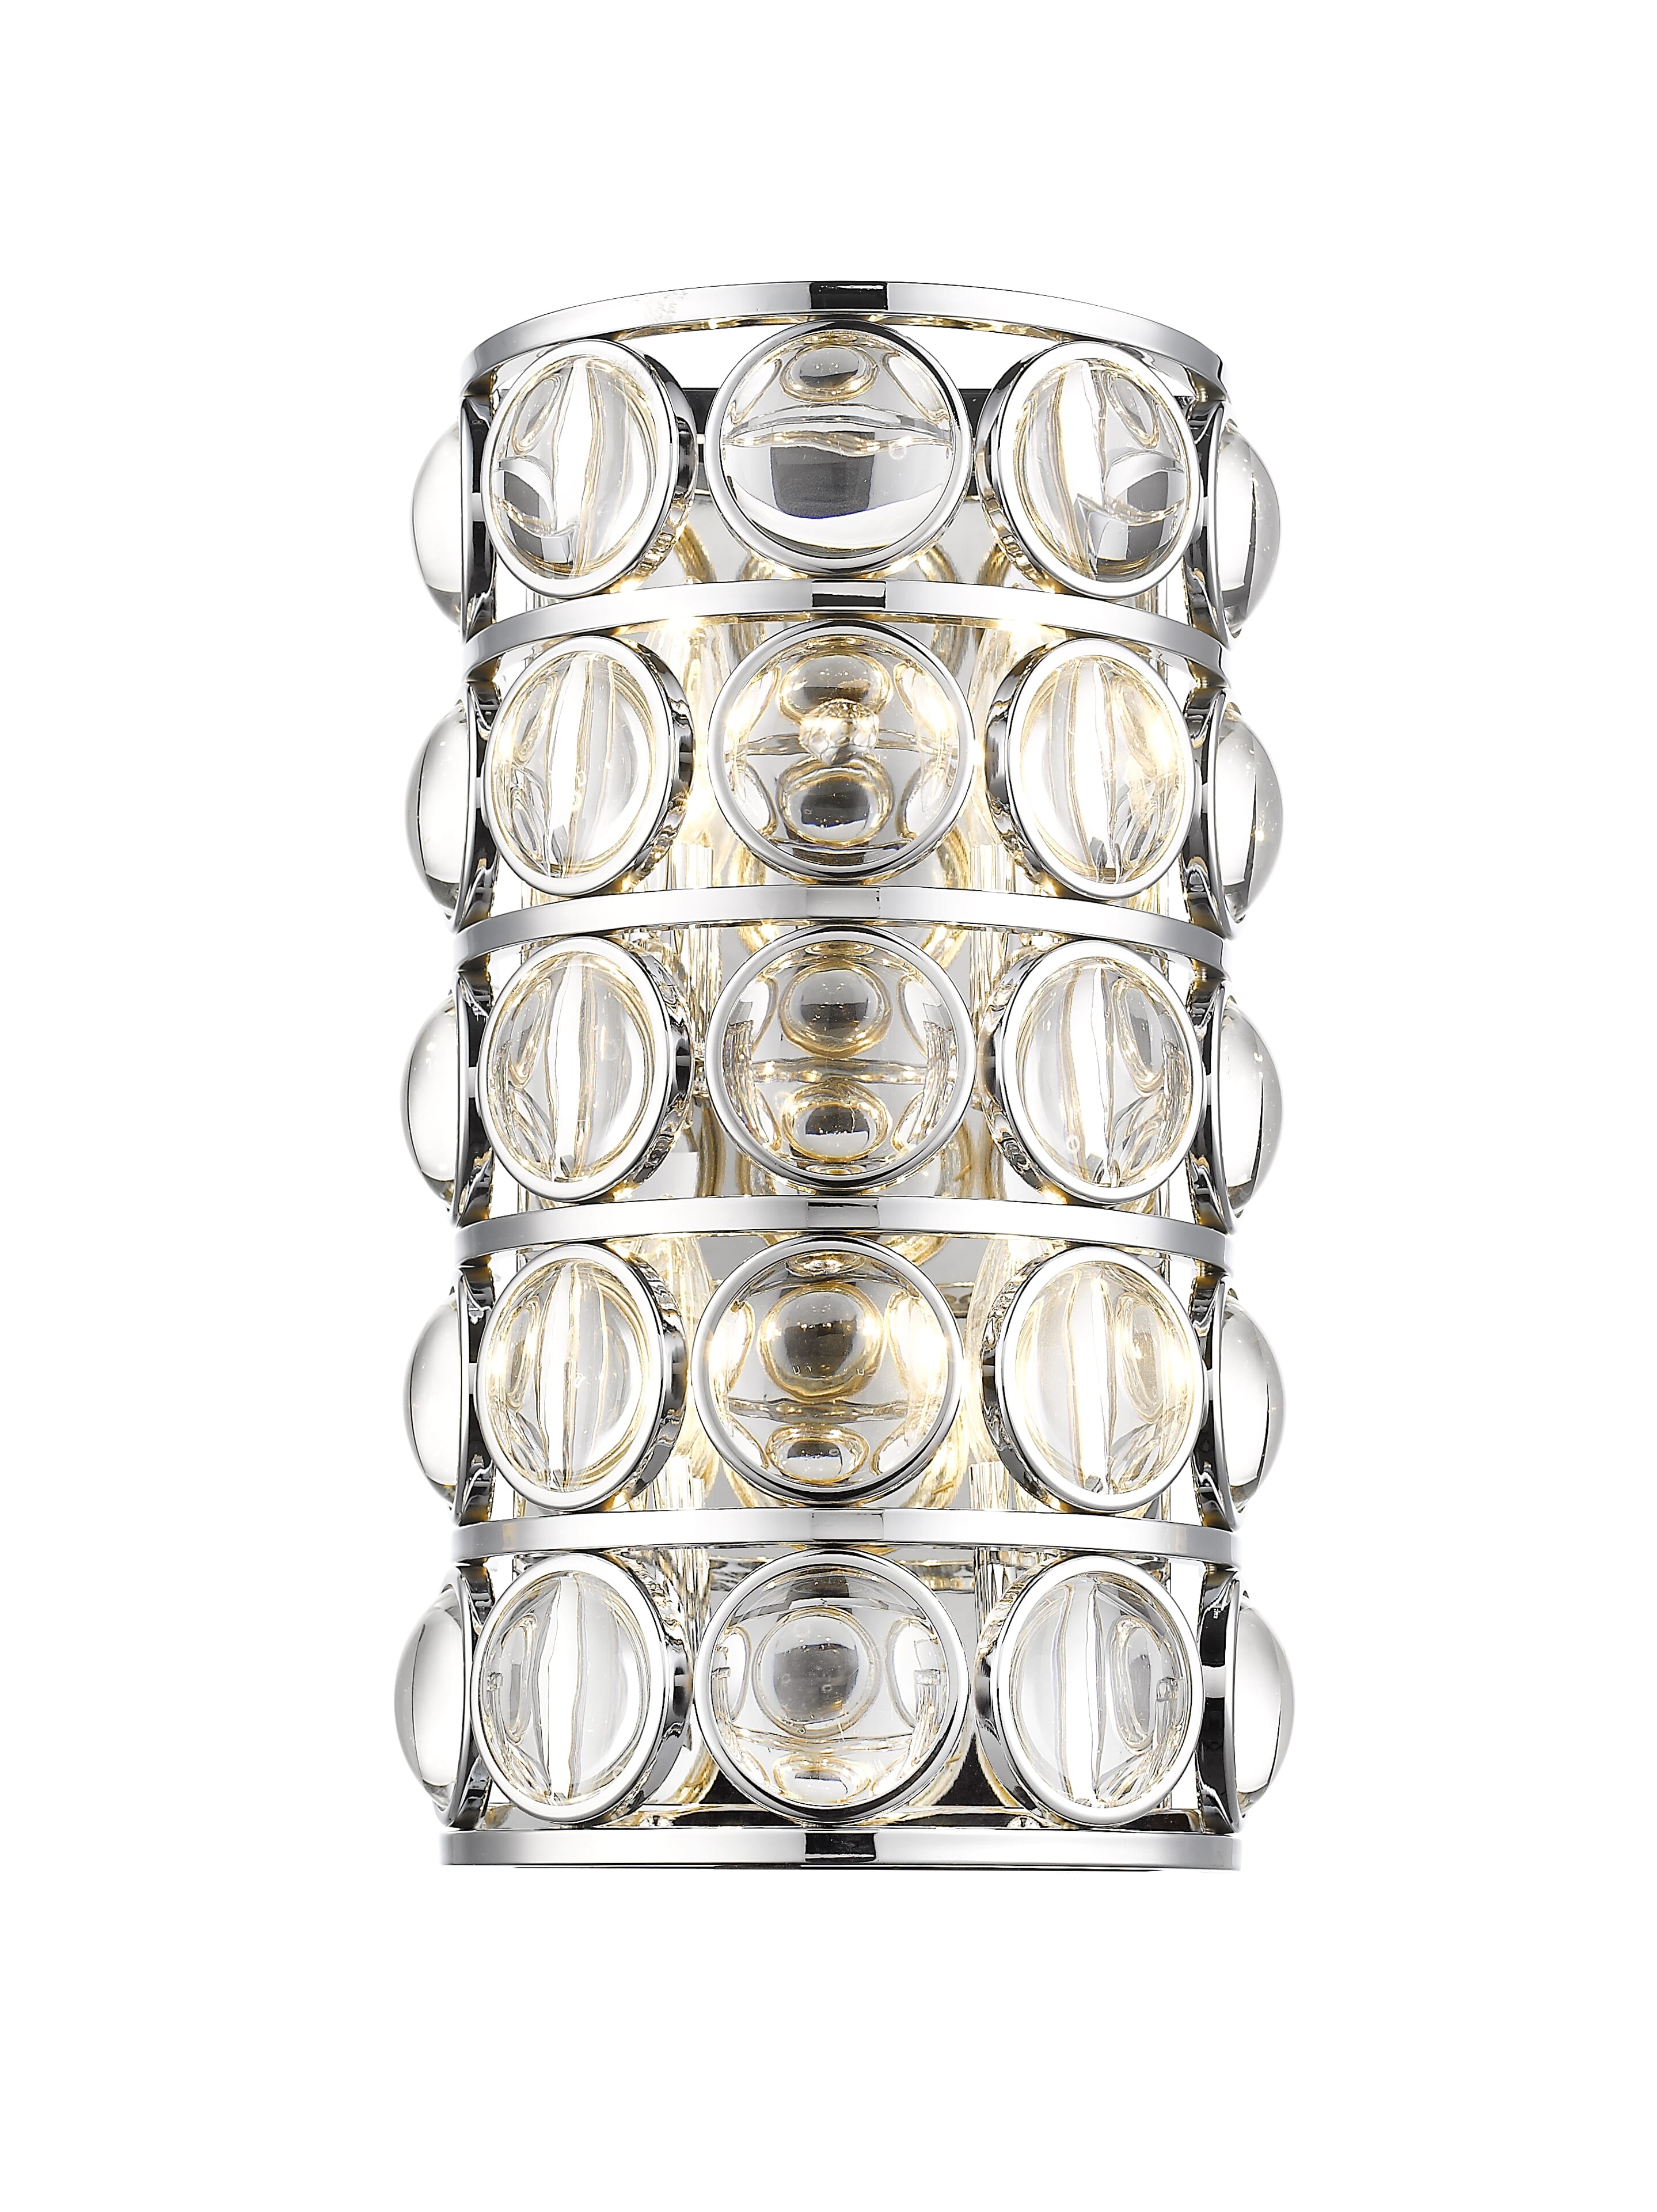 Eternity 4-Light Wall Sconce In Chrome